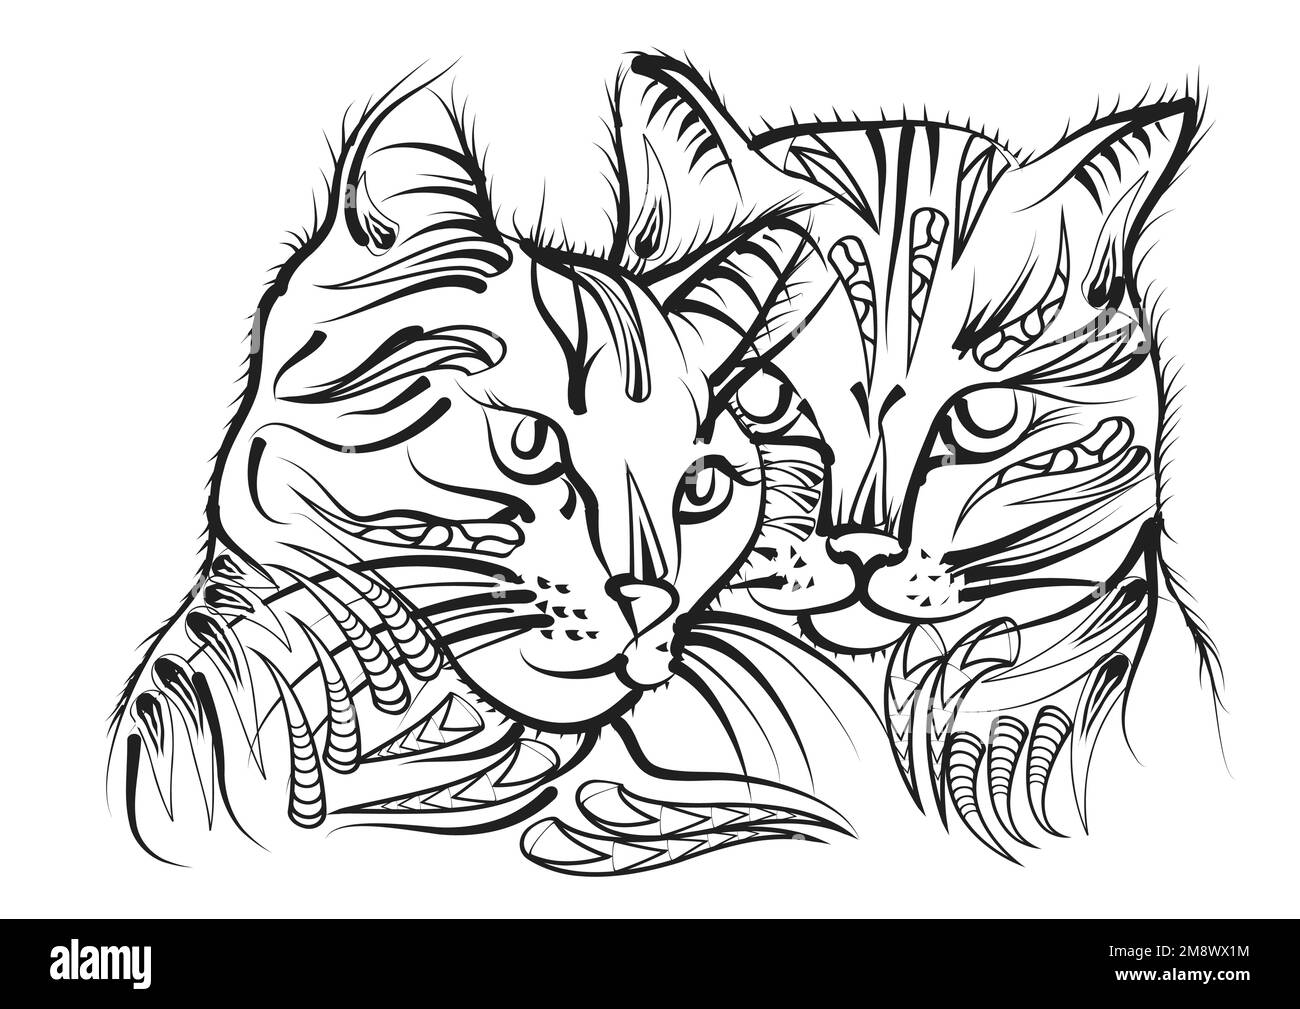 Two cats Stock Vector Images - Alamy